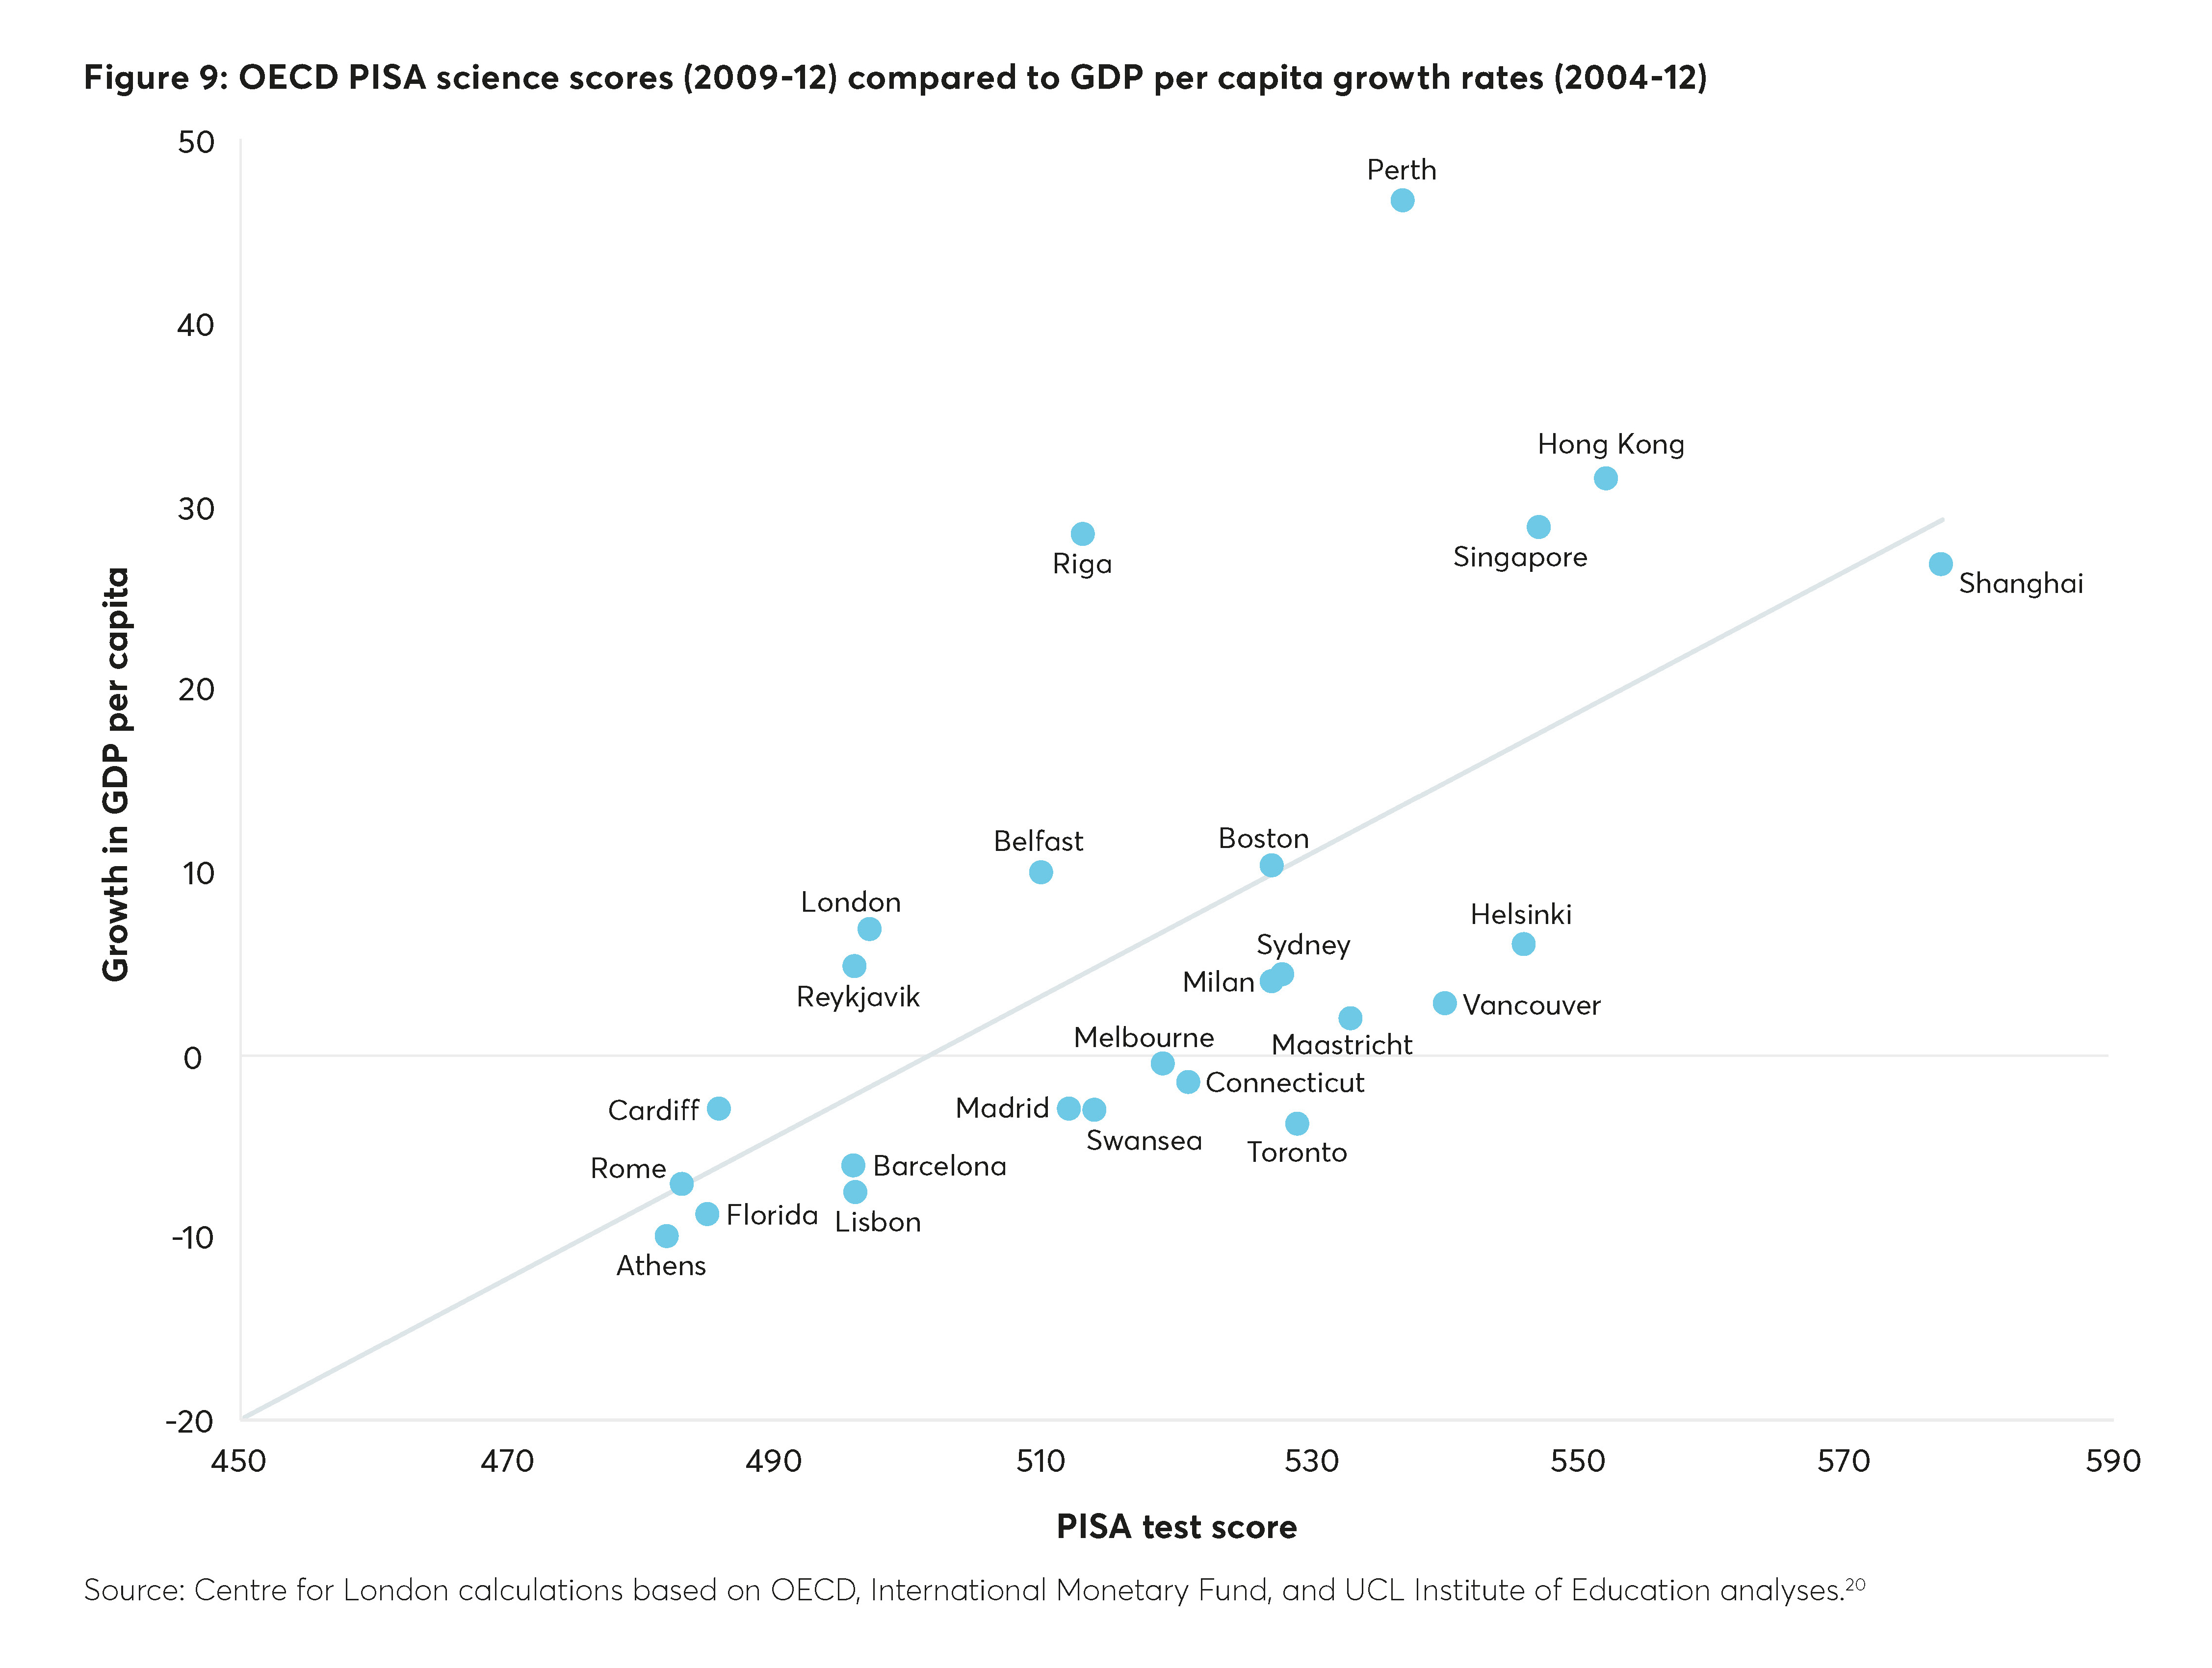 OECD PISA science scores compared to GDP per capital growth rates